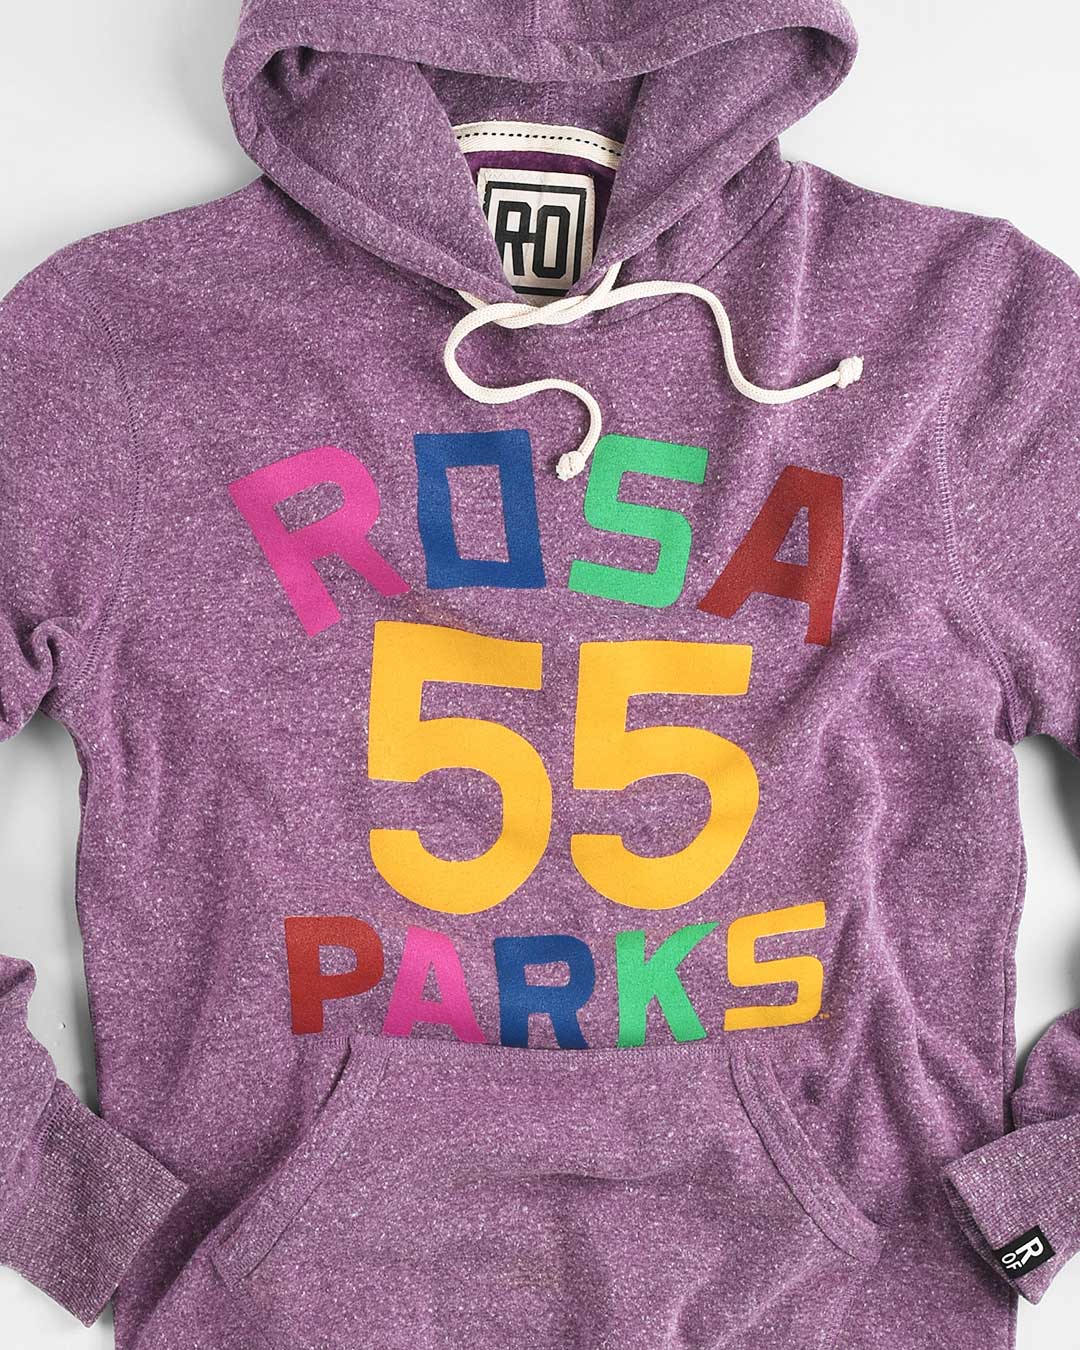 BHT - Rosa Parks 1955 Purple PO Hoody - Roots of Fight